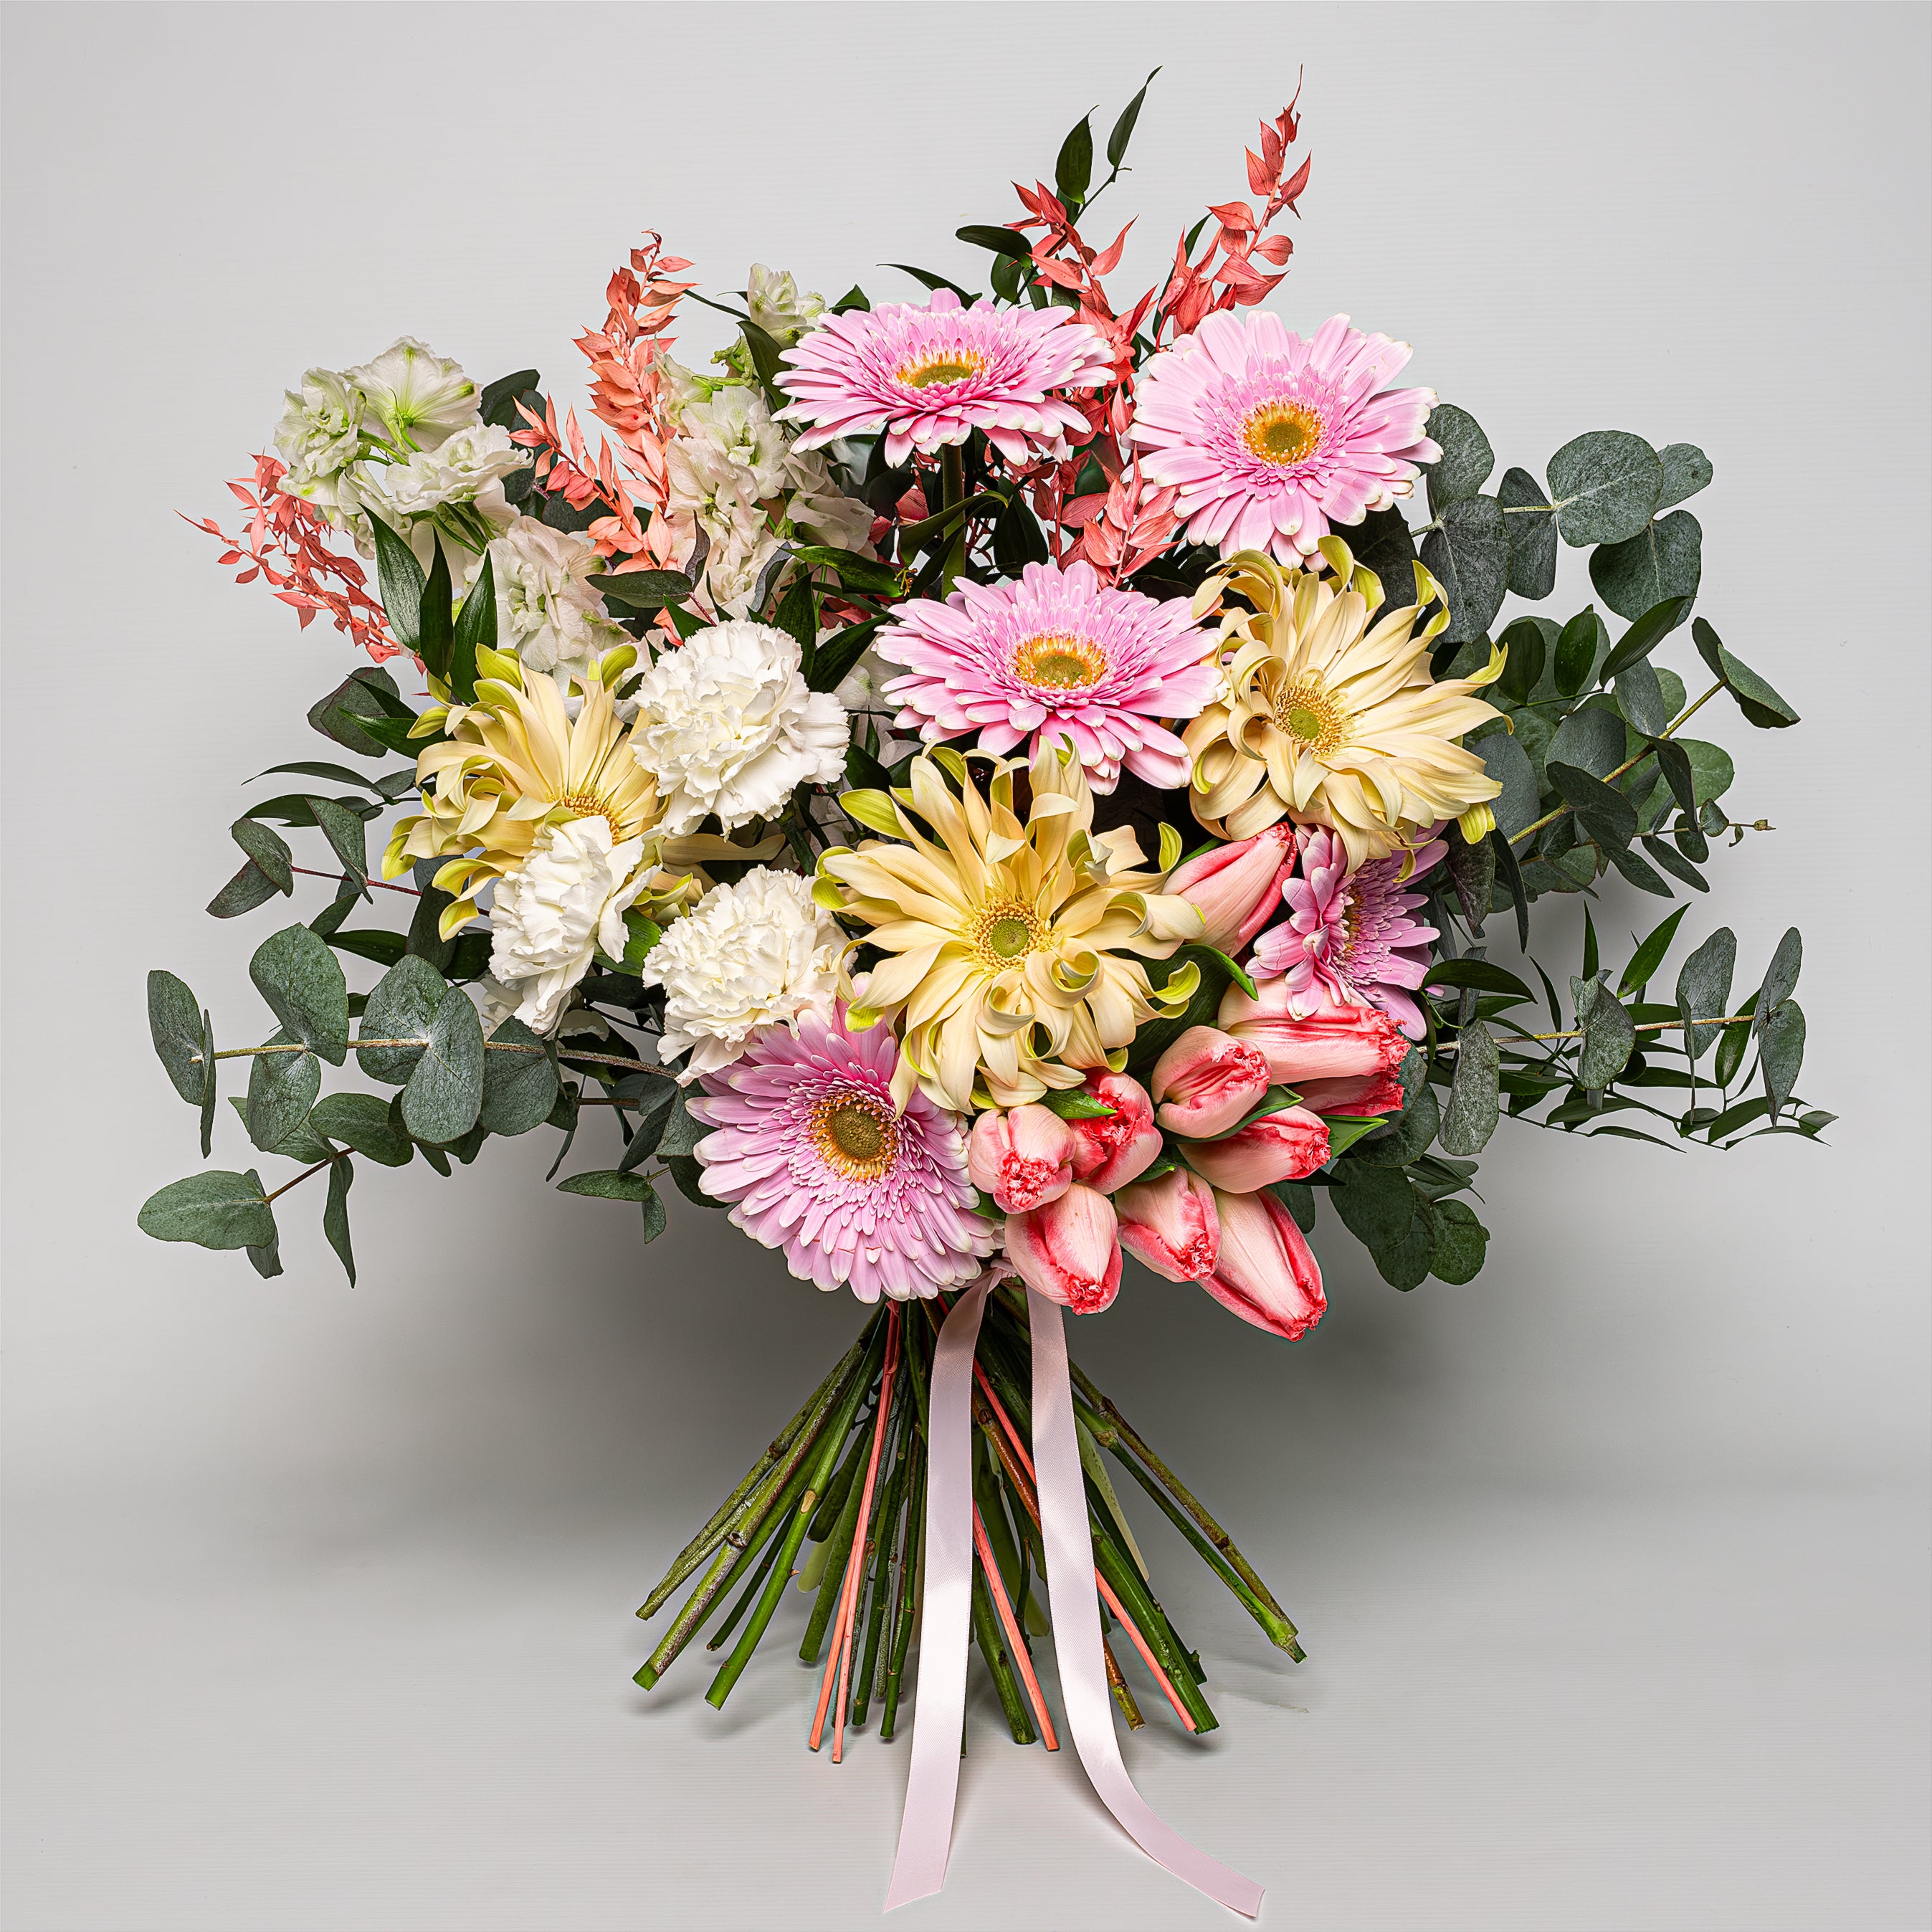 Florist Choice radiates with spring's soft, warm hues, a fitting tribute to celebrate special events and occasions featuring gerbera daisies in shades of pink and creamy yellow, their large, sunny blooms symbolizing cheerfulness and purity. The delicate pink of the daisies is complemented by the subtle blush of tulips, whose petals have a gentle, painterly streak of pink and white. White carnations and chrysanthemums offer a soft delicate look.